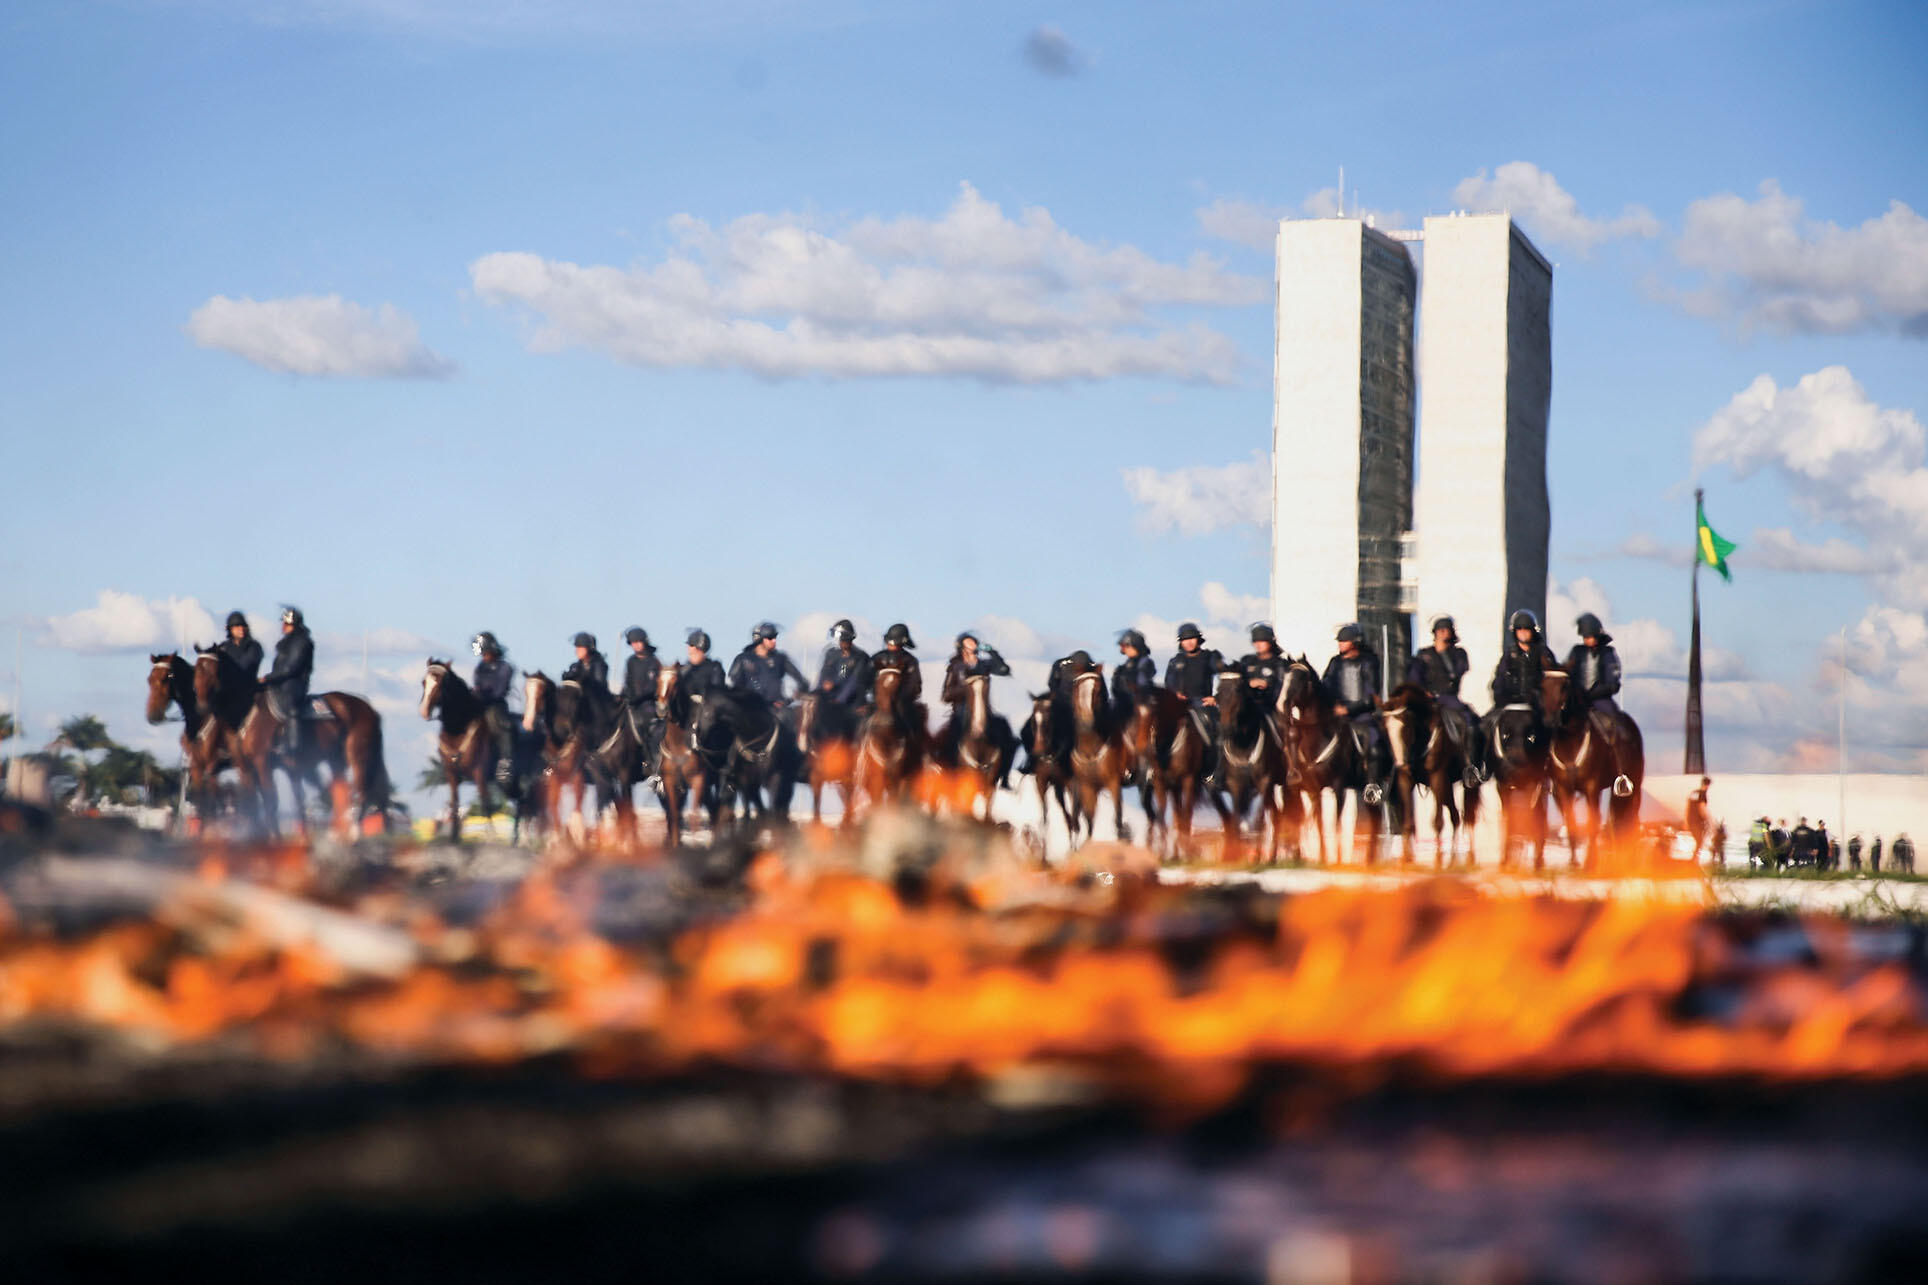 Mounted police shown through the flames of a fire lit at an anti-government demonstration during votes overturning progressive policies on worker rights and pensions, May 2017. (Photo by Marcelo Camargo/Agência Brasil Fotografias.)